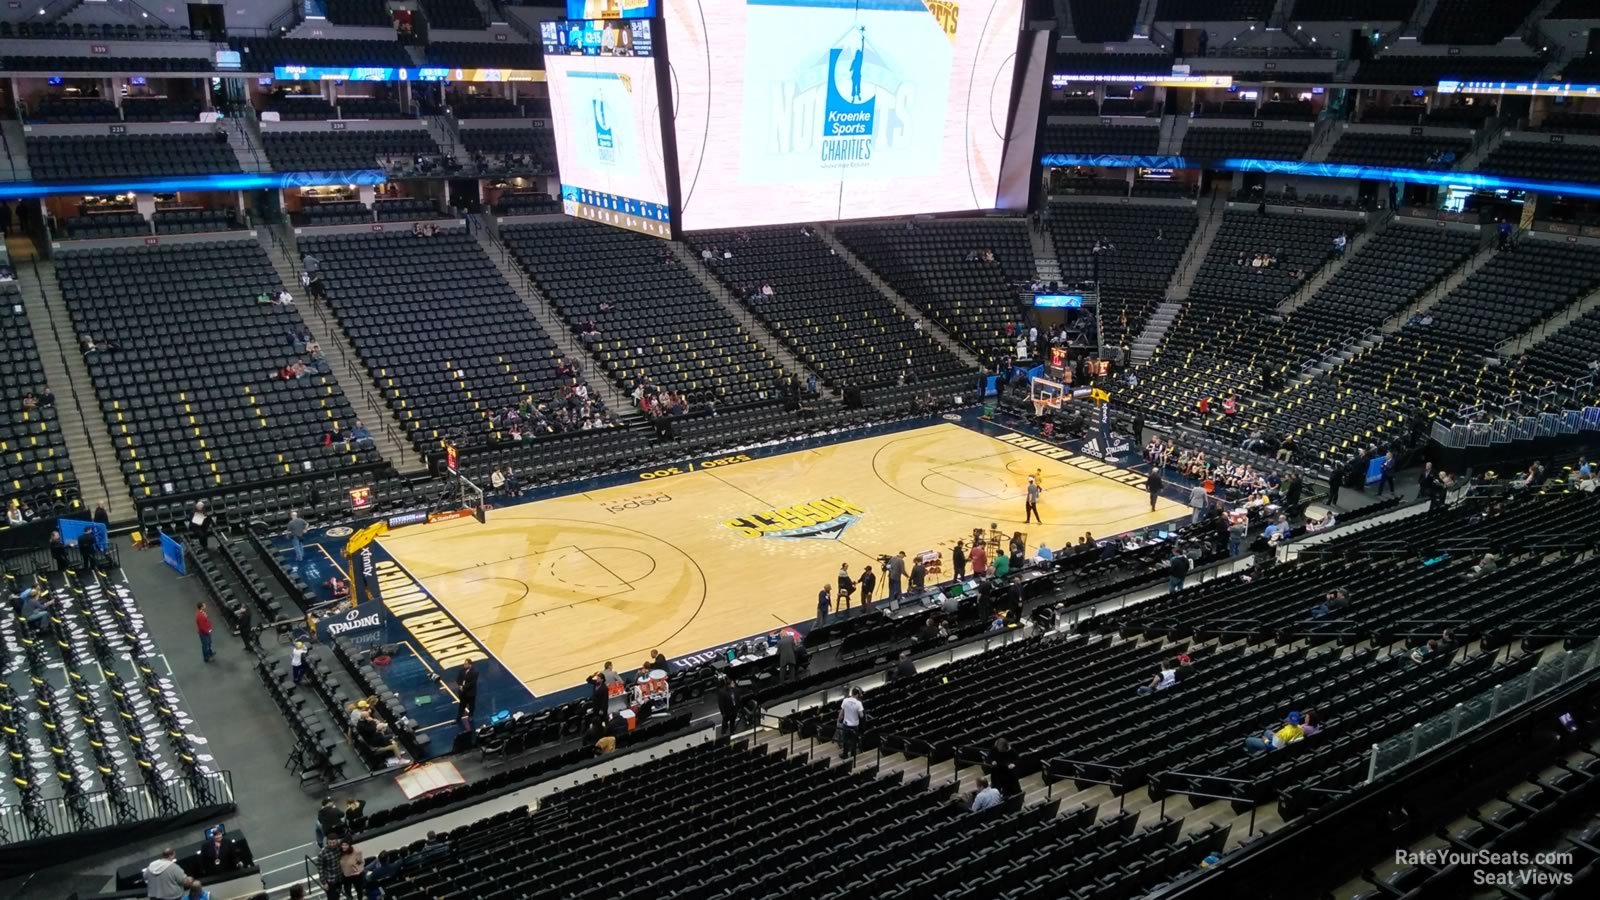 section 309, row 1 seat view  for basketball - ball arena